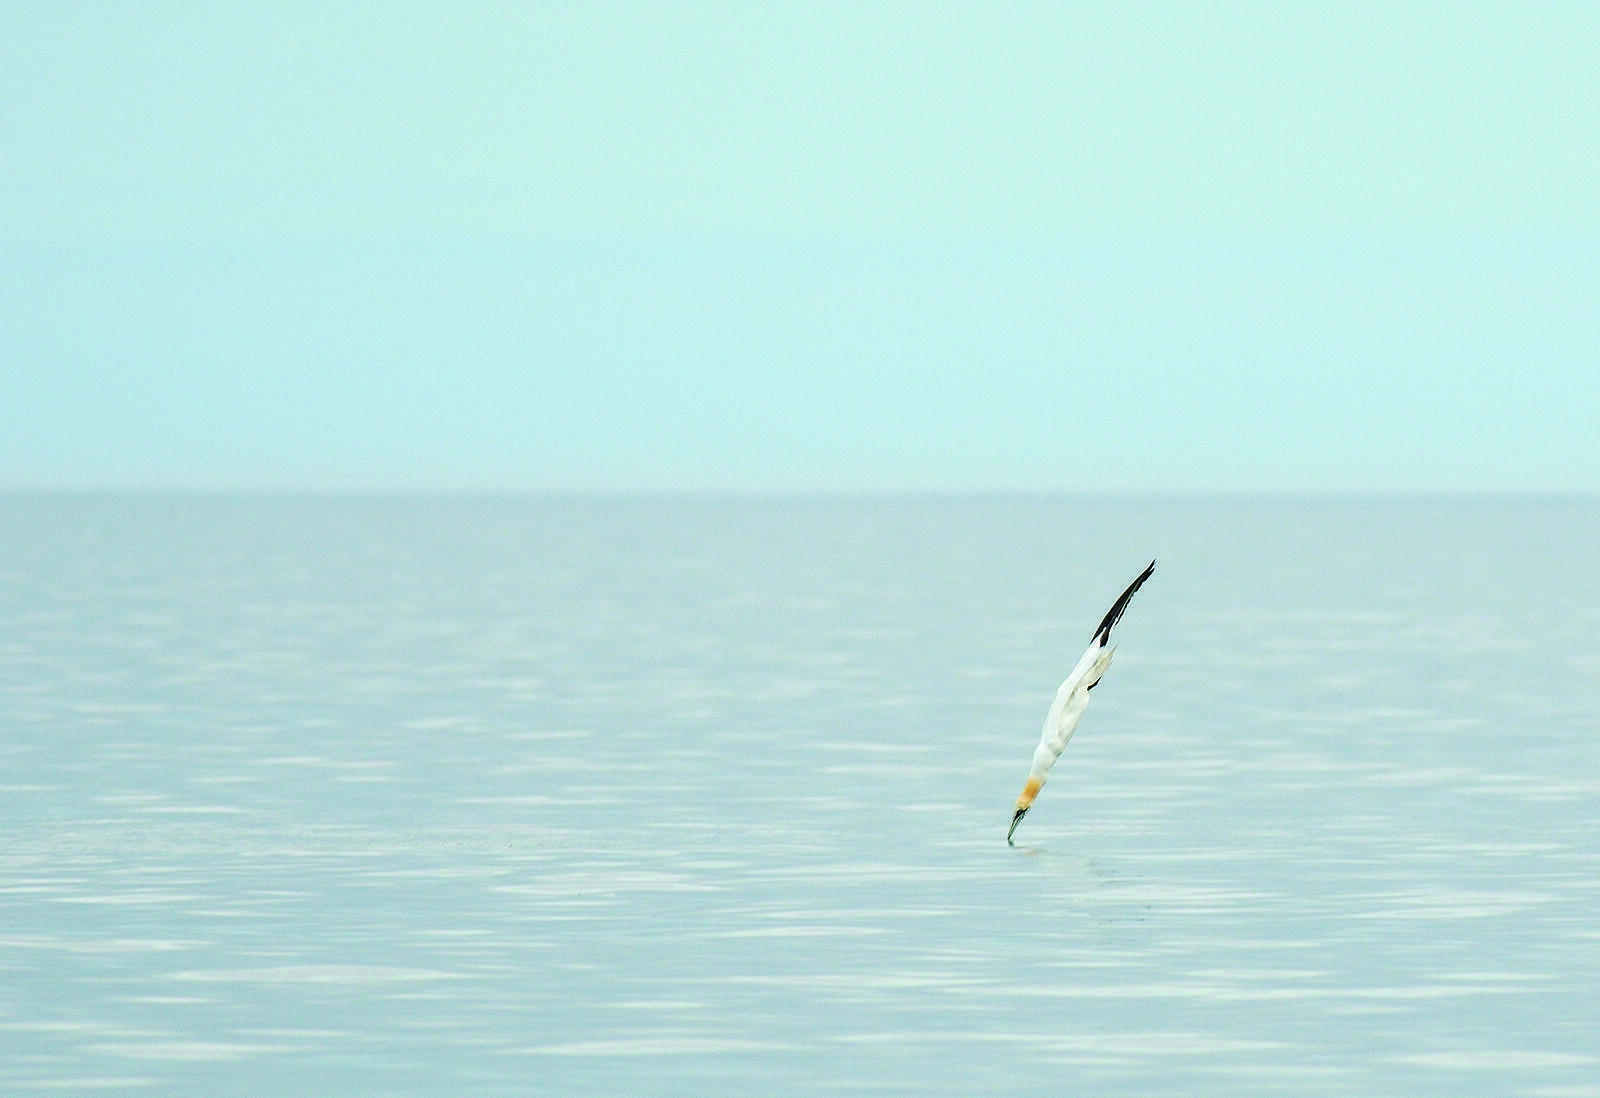 Gannet diving into the water to prey on fish